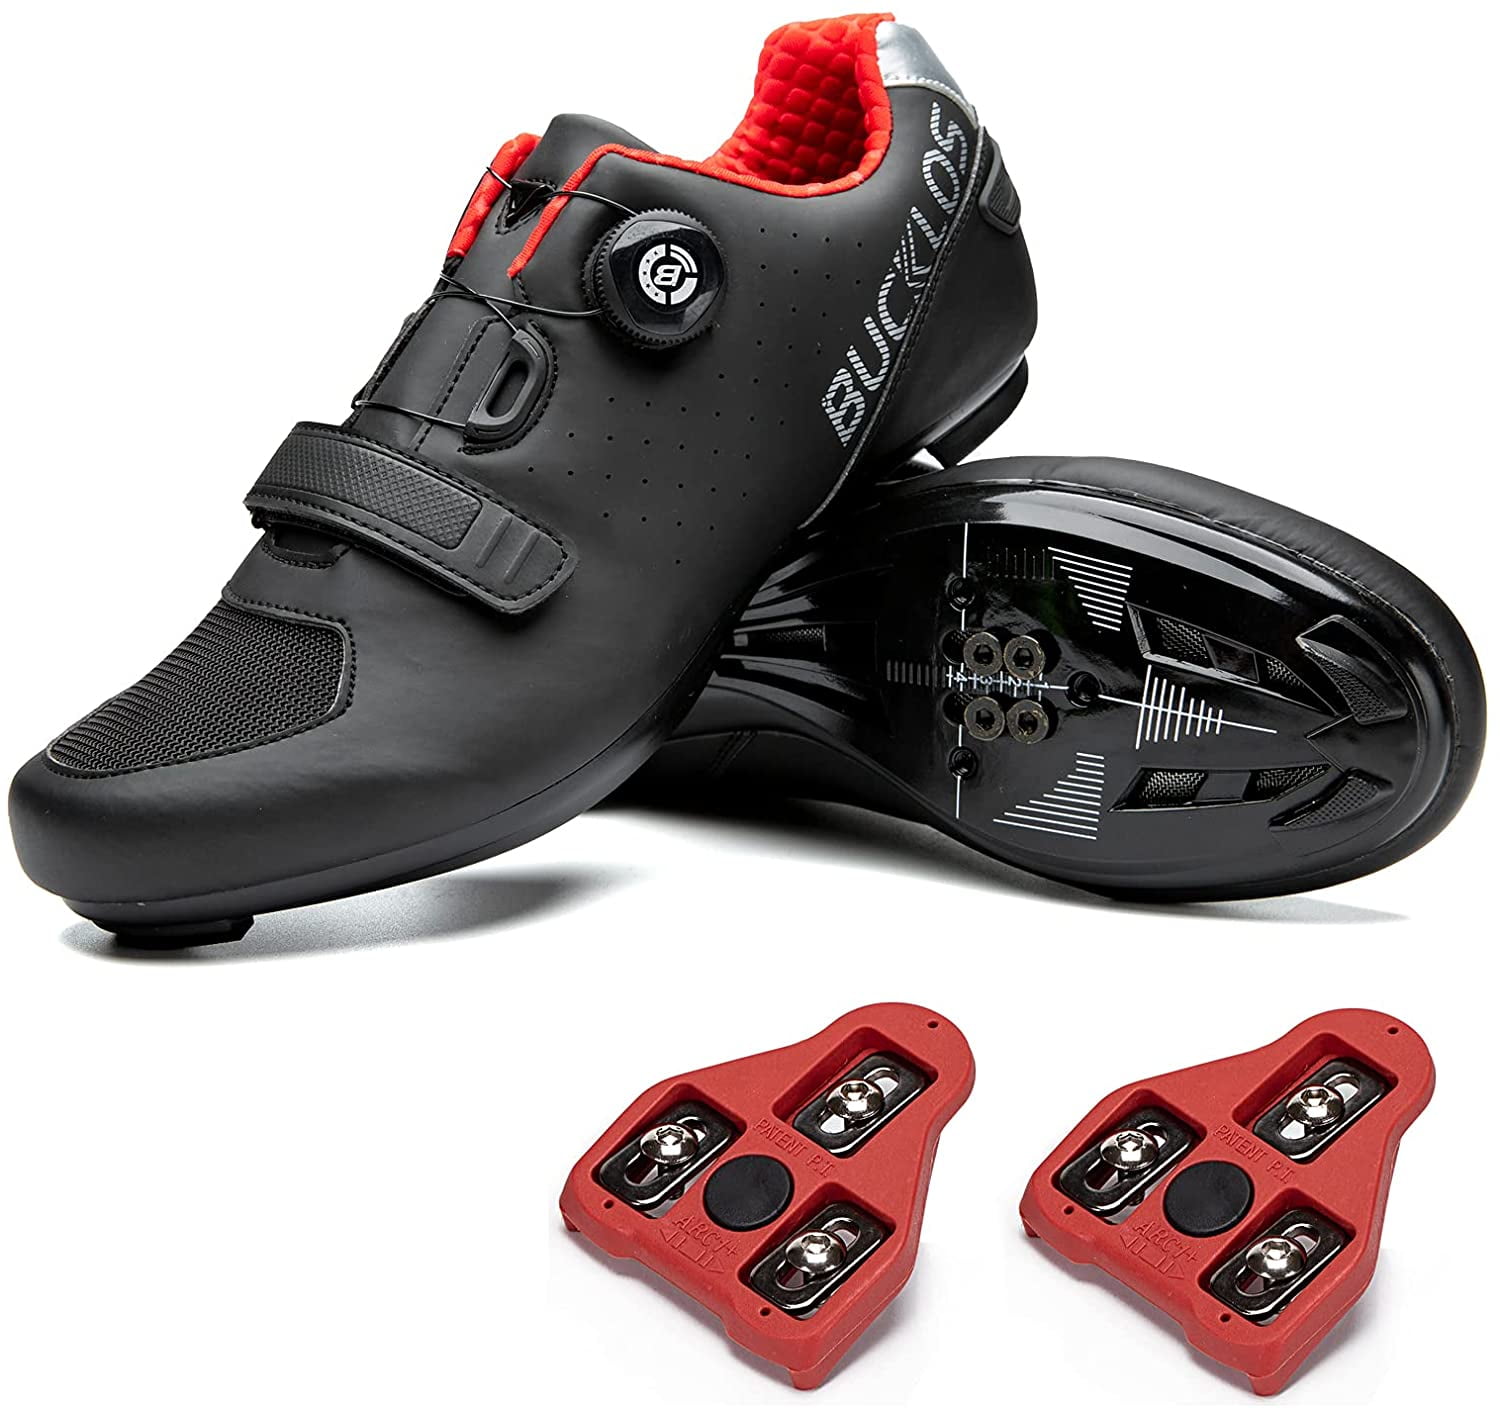 BUCKLOS Road Bike Shoes Compatible with Peloton Outdoor Indoor Cycling Riding Shoes Men Women Special Sole Breathable Spinning Shoes Suit for Look Delta SPD/SPD SL